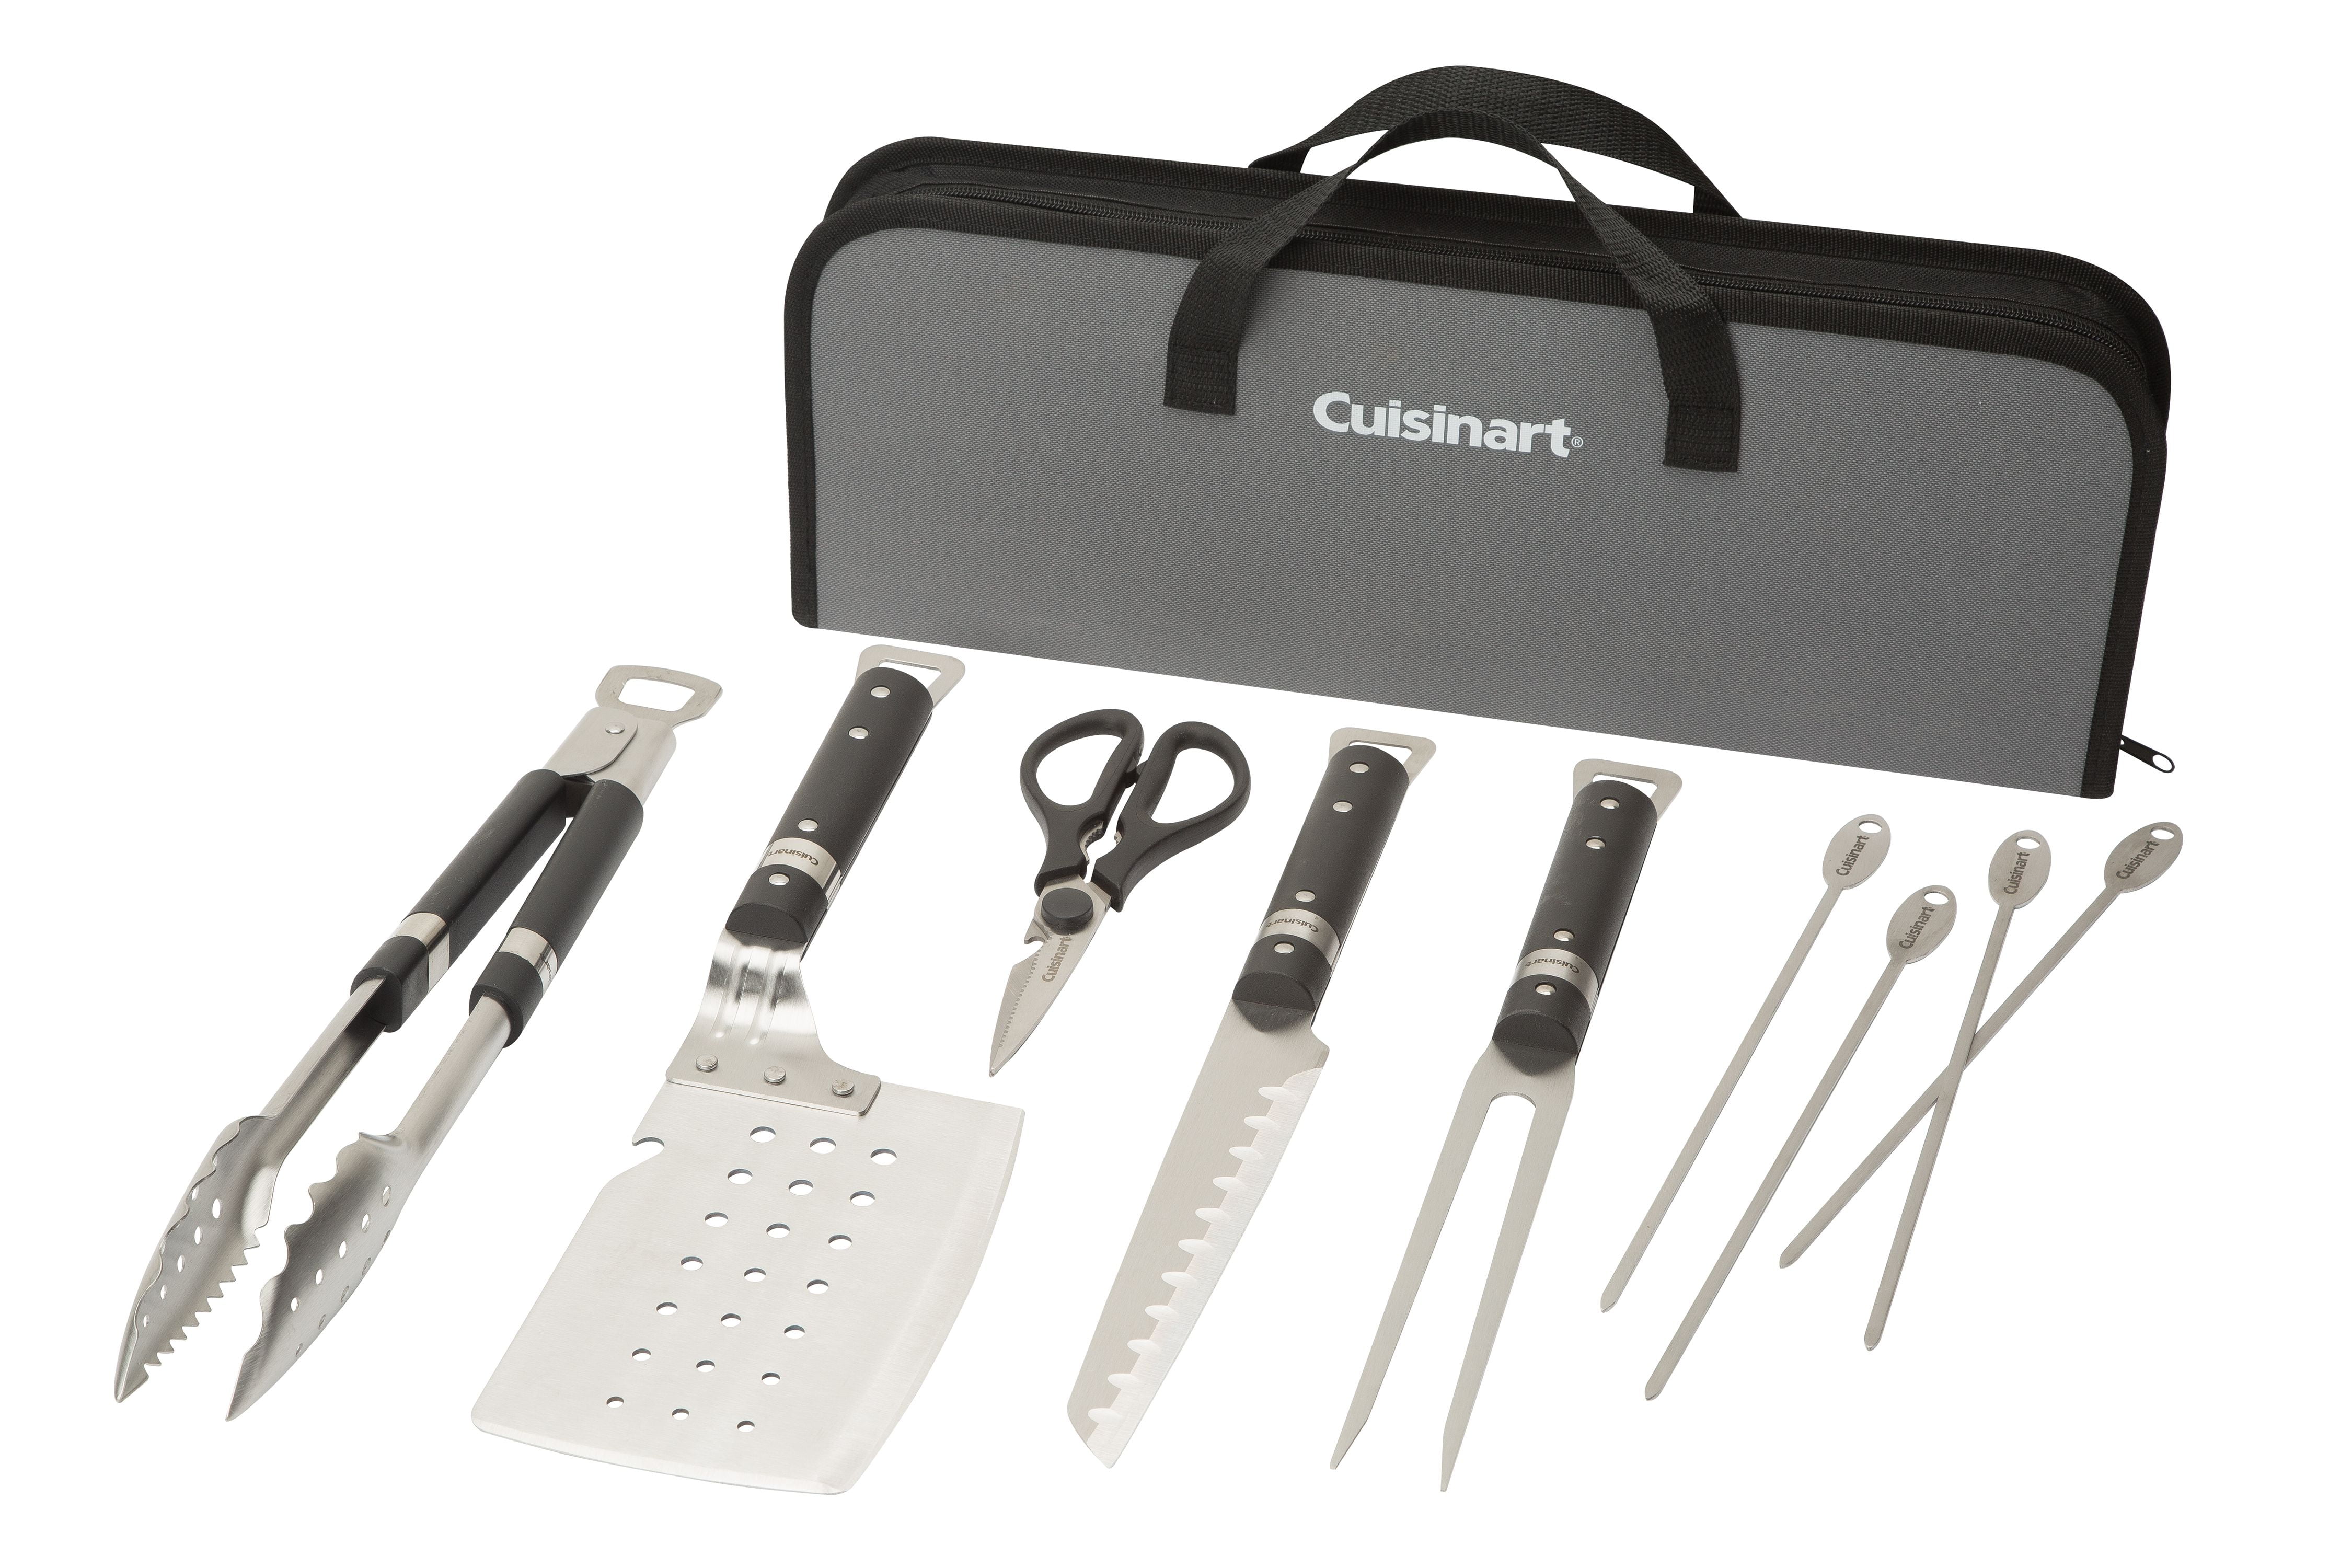 Cuisinart Classic 4-piece Stainless Steel Shear Set Brand New